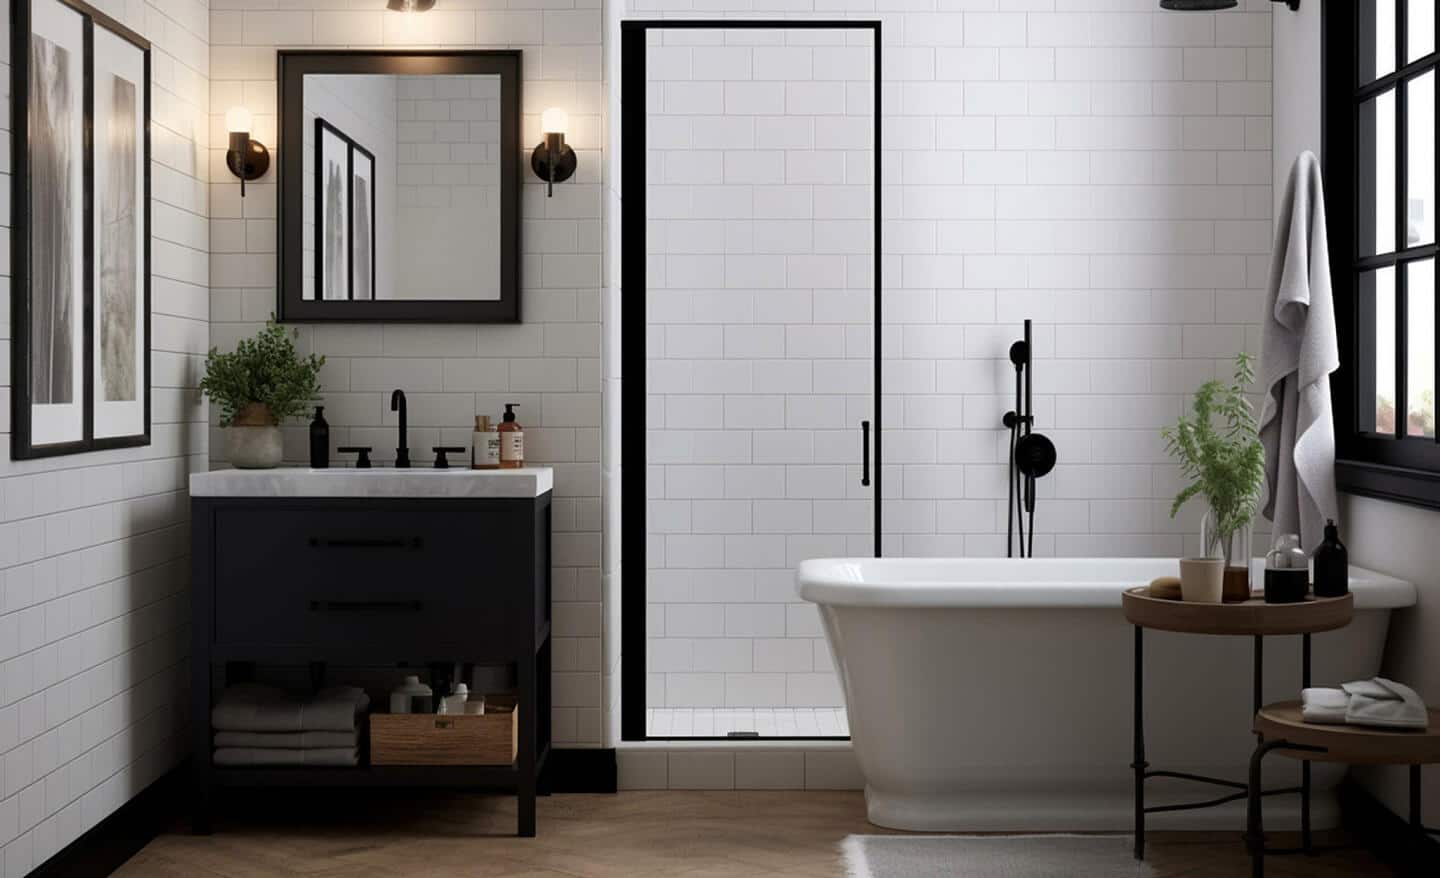 A bathroom with a walk-in shower.